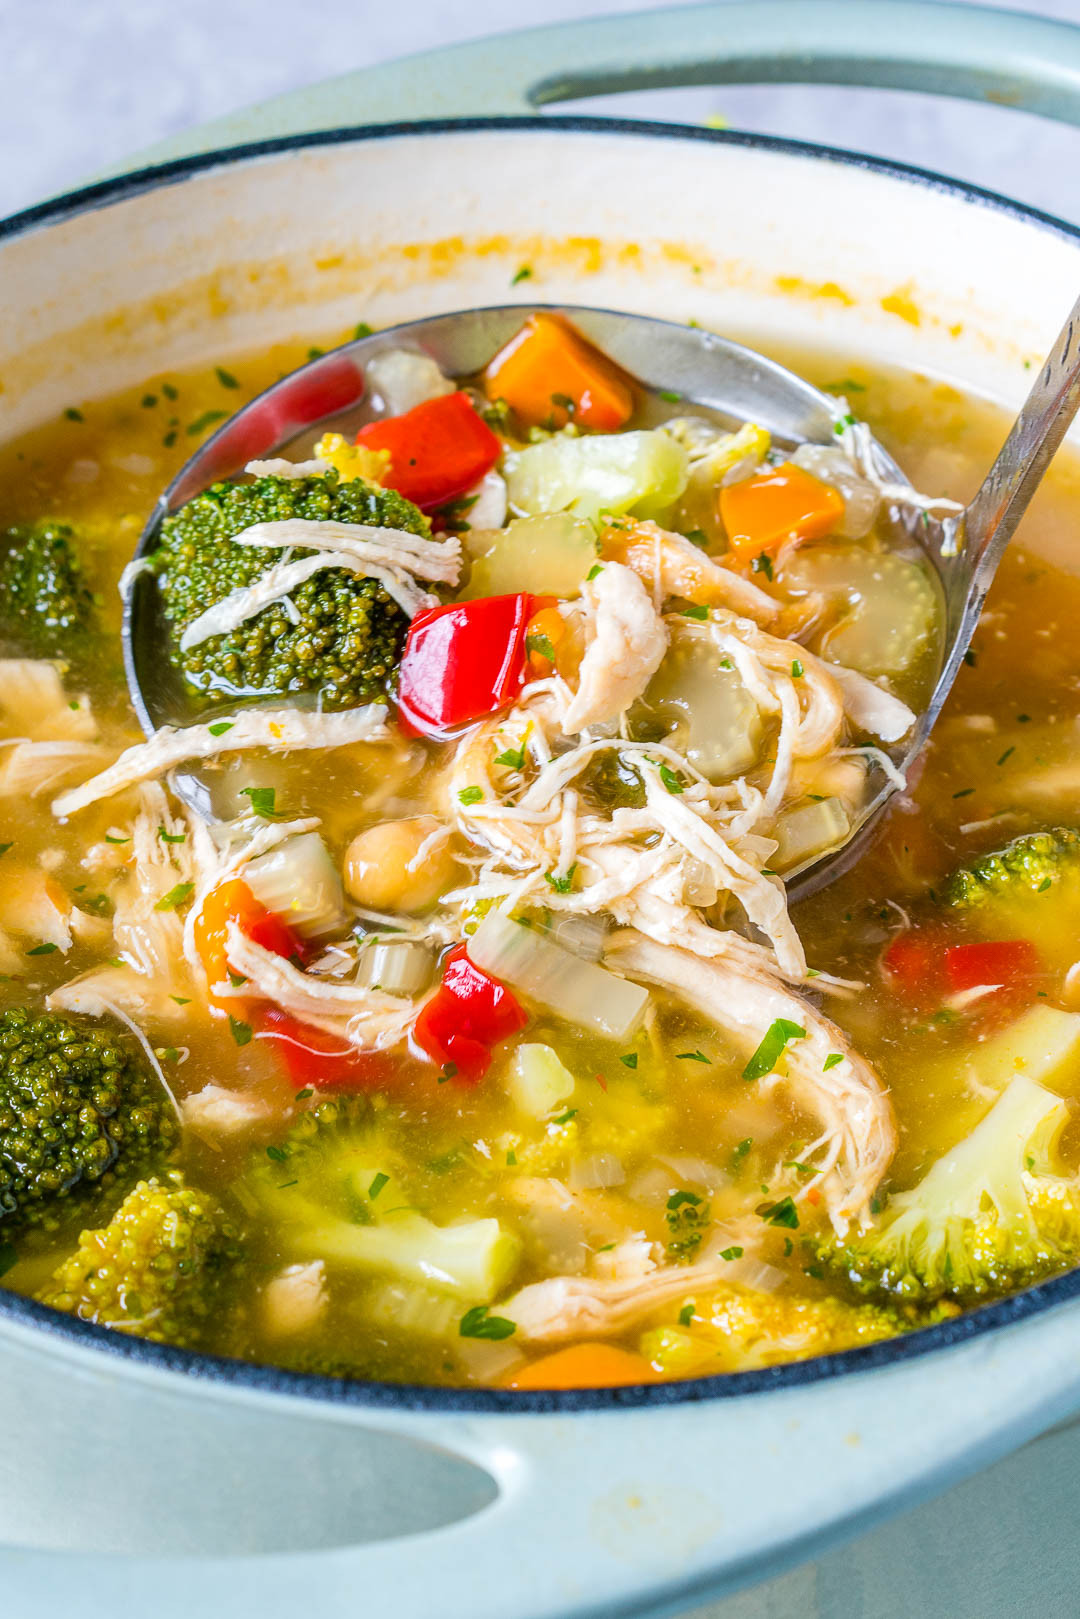 Detox Chicken Soup
 Eat this Detox Soup to Lower Inflammation and Shed Water